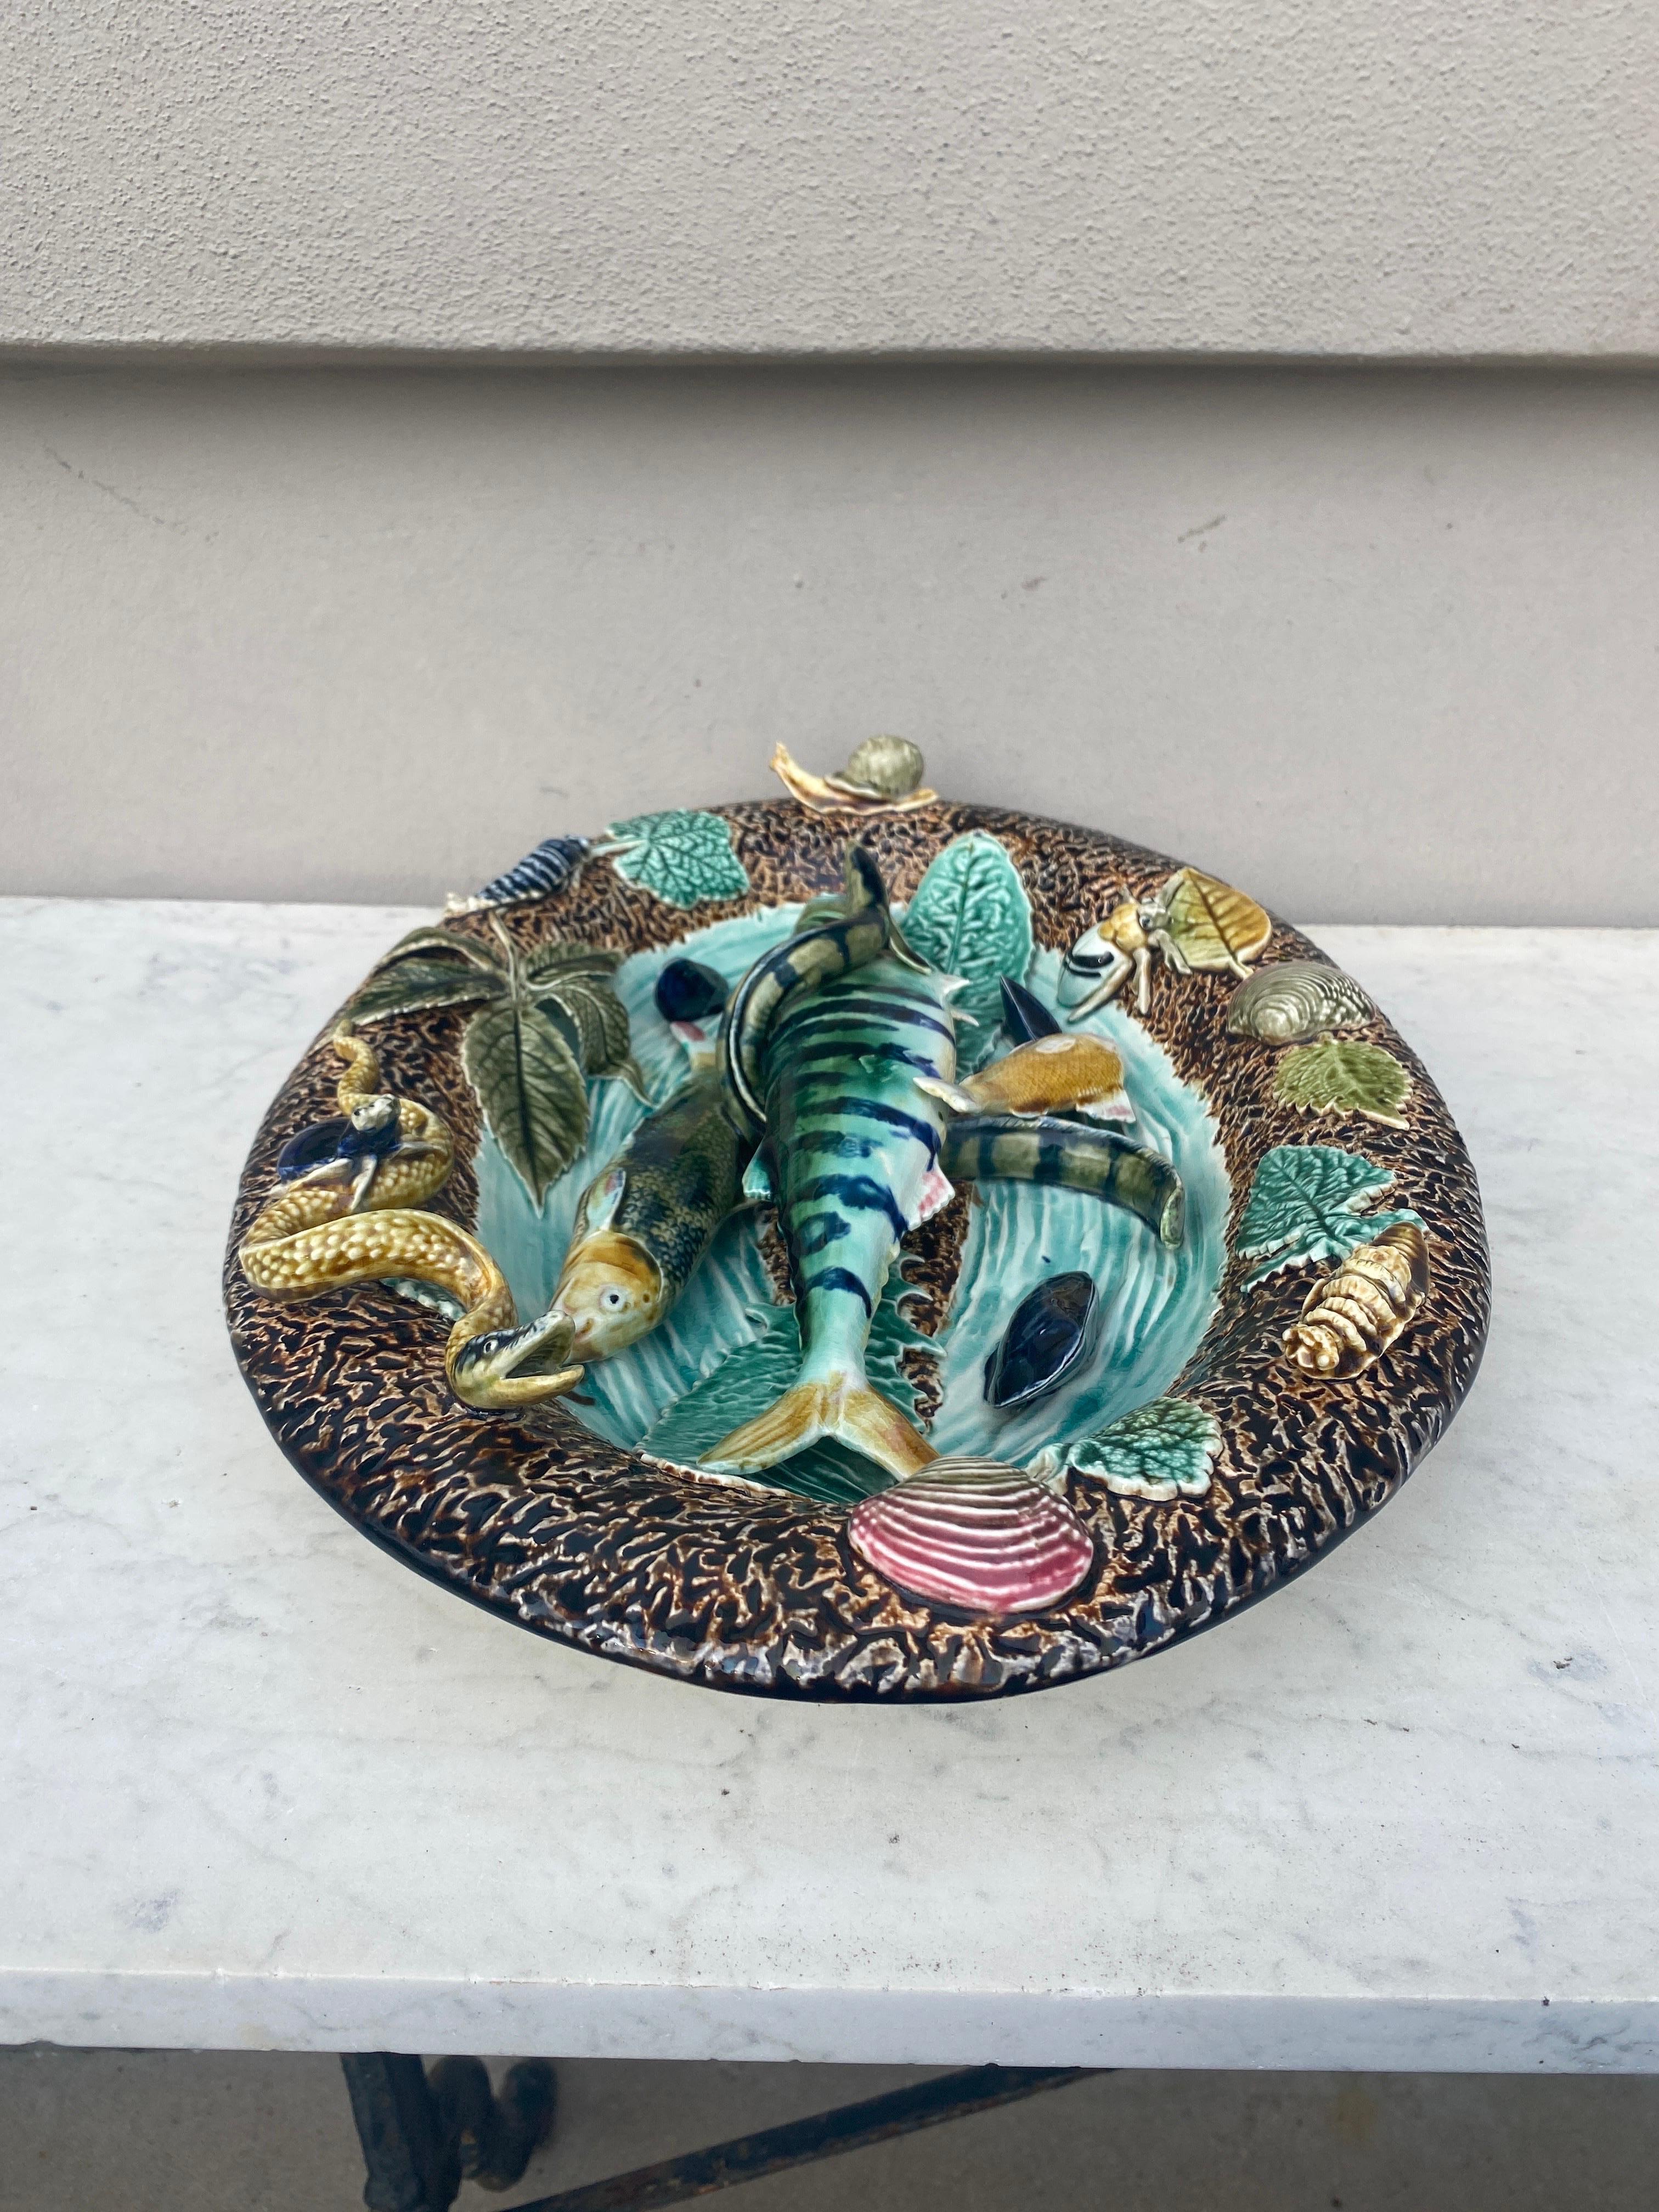 Colorful Palissy wall platter signed Hippolyte Boulenger Choisy le Roi, circa 1880. 
Decorated with fishs,snake, snail,bugs,shells,mussel and leaves.